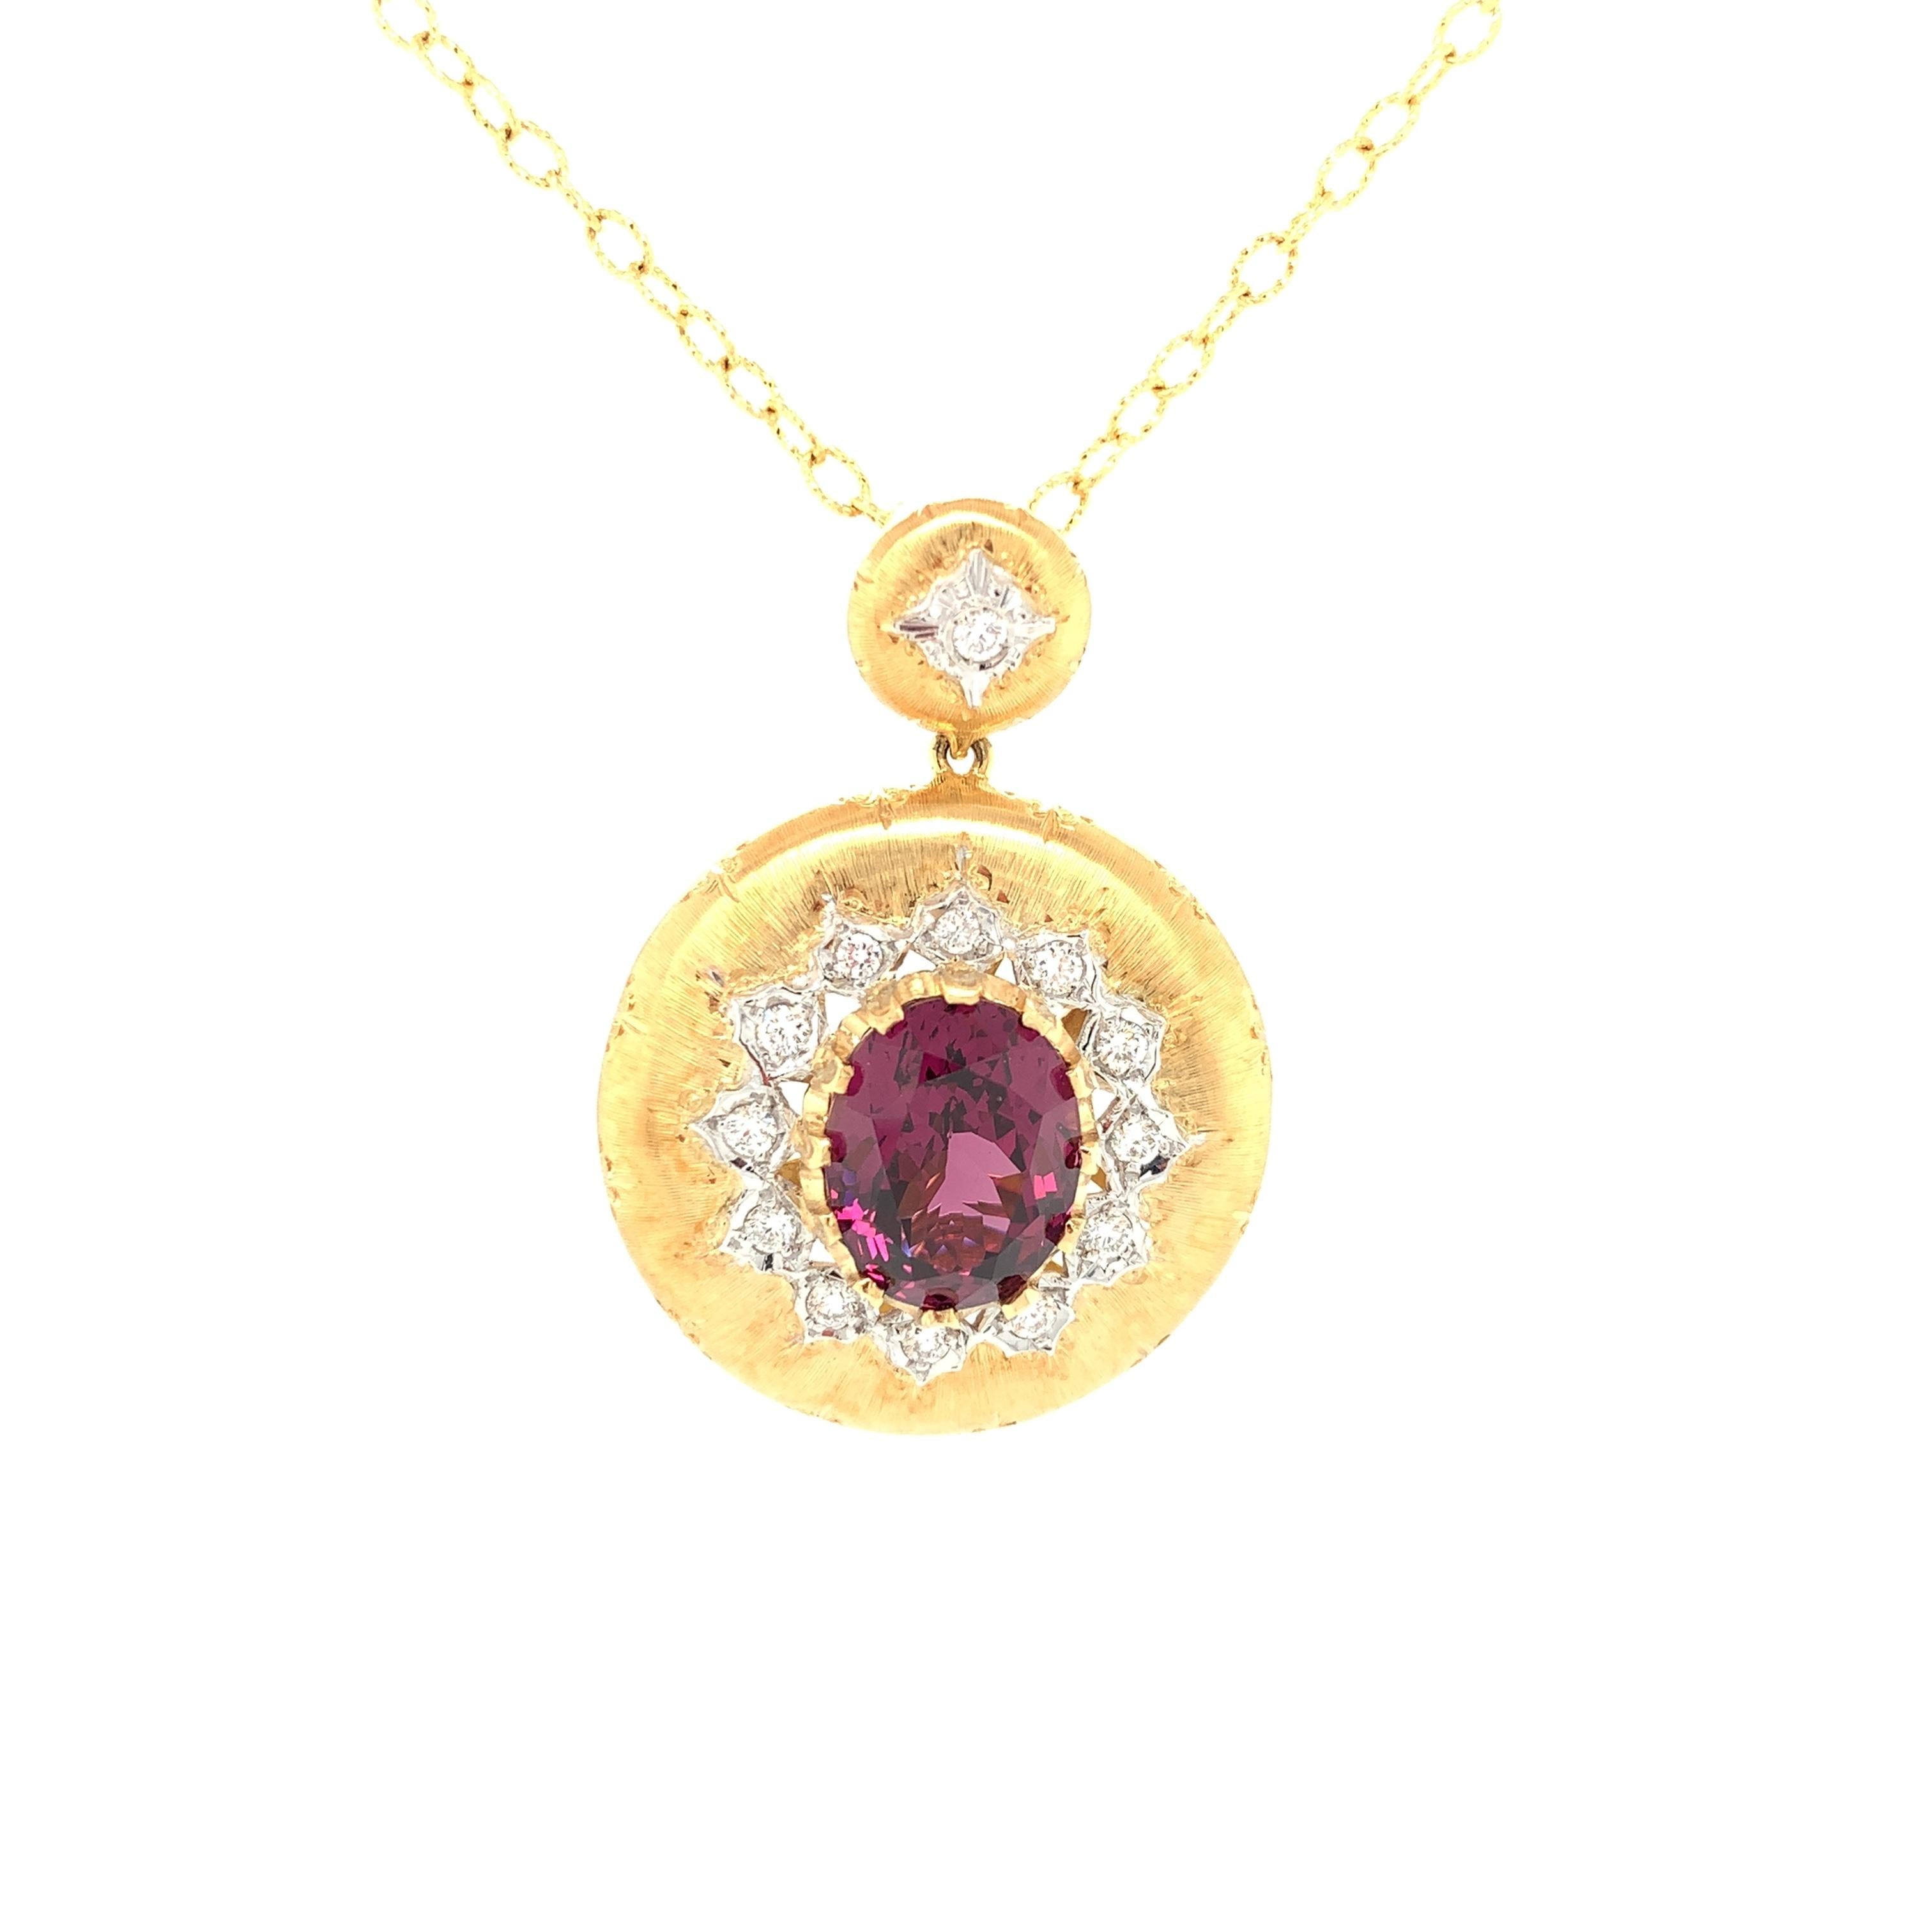 Nature created garnets in a variety of colors, and one of the most popular is the purplish red variety called rhodolite, like the one featured in this beautiful pendant. Our artisan jewelers in Italy created this handmade necklace in a timeless